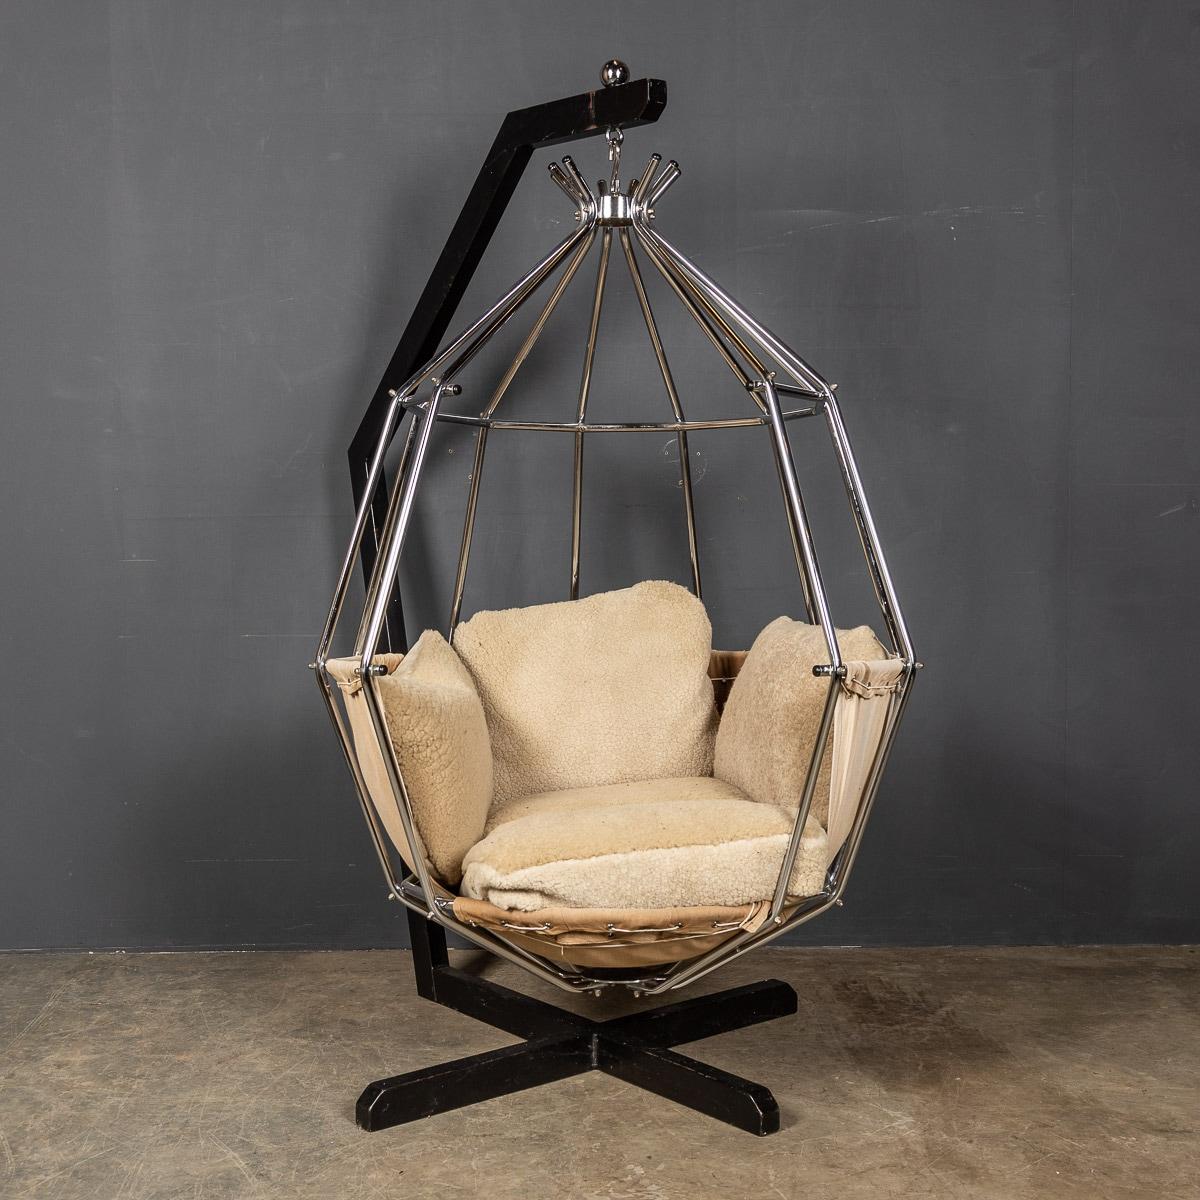 Iconic Swedish Ib Arberg design parrot cage chair, circa 1970-1980. Original cotton canvas upholstery, nickel-plated swing cage with a black enamel steel base.

Condition
In great condition - No Damage, wear consistent with age.

Size
Height: